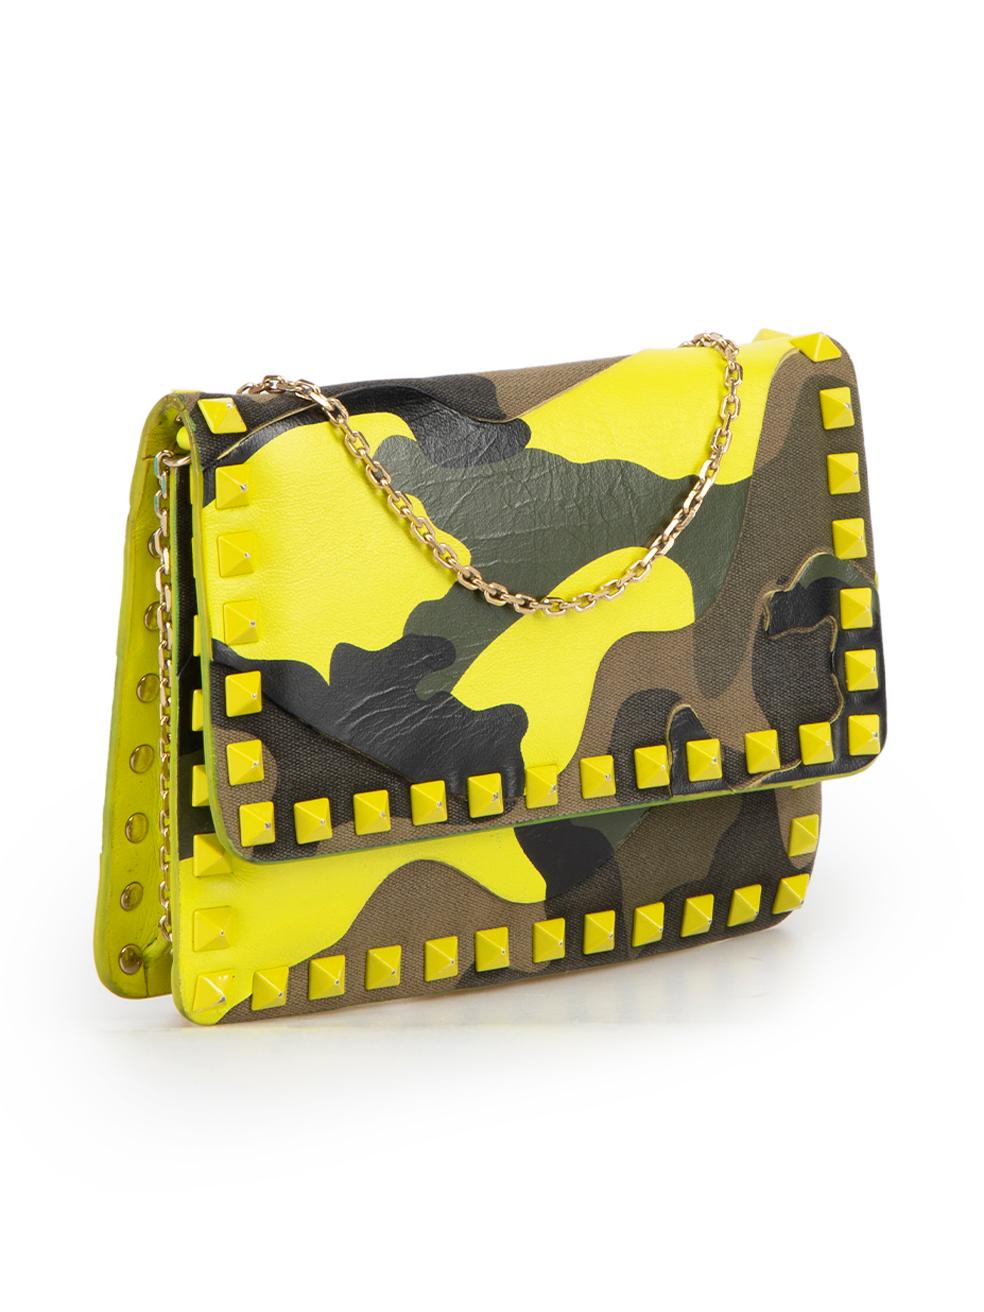 CONDITION is Good. Minor wear to pouch is evident. Light wear to the leather camouflage panelling with marks and general creasing of the leather throughout. The rockstud embellishment also has chips to the neon paint on this used Valentino designer